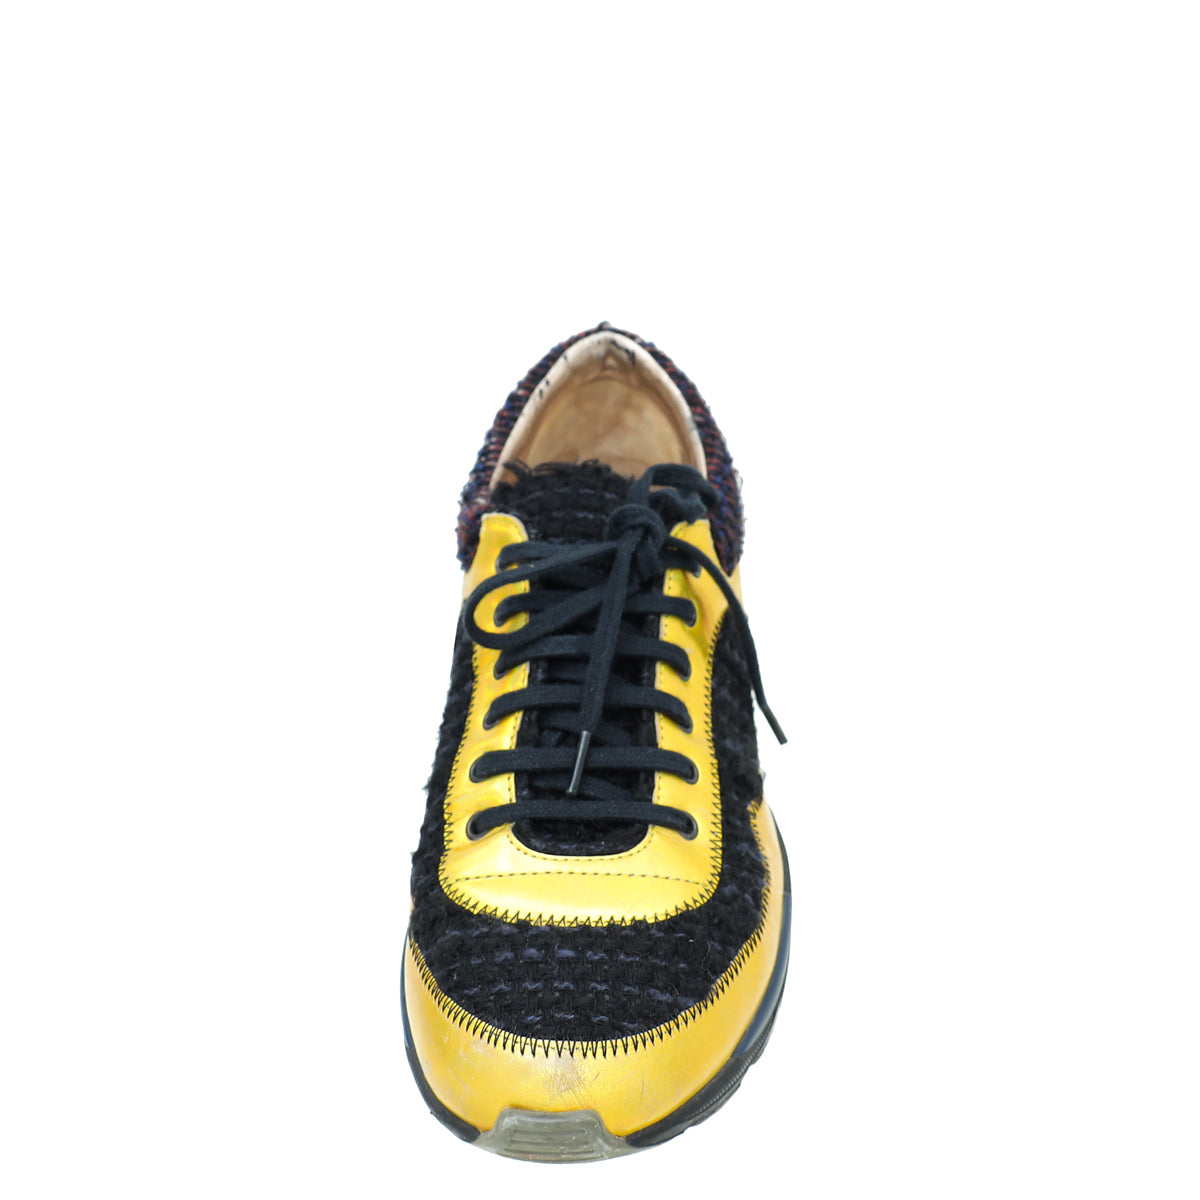 Chanel Tricolor Tweed Lace Up Sneakers 38.5